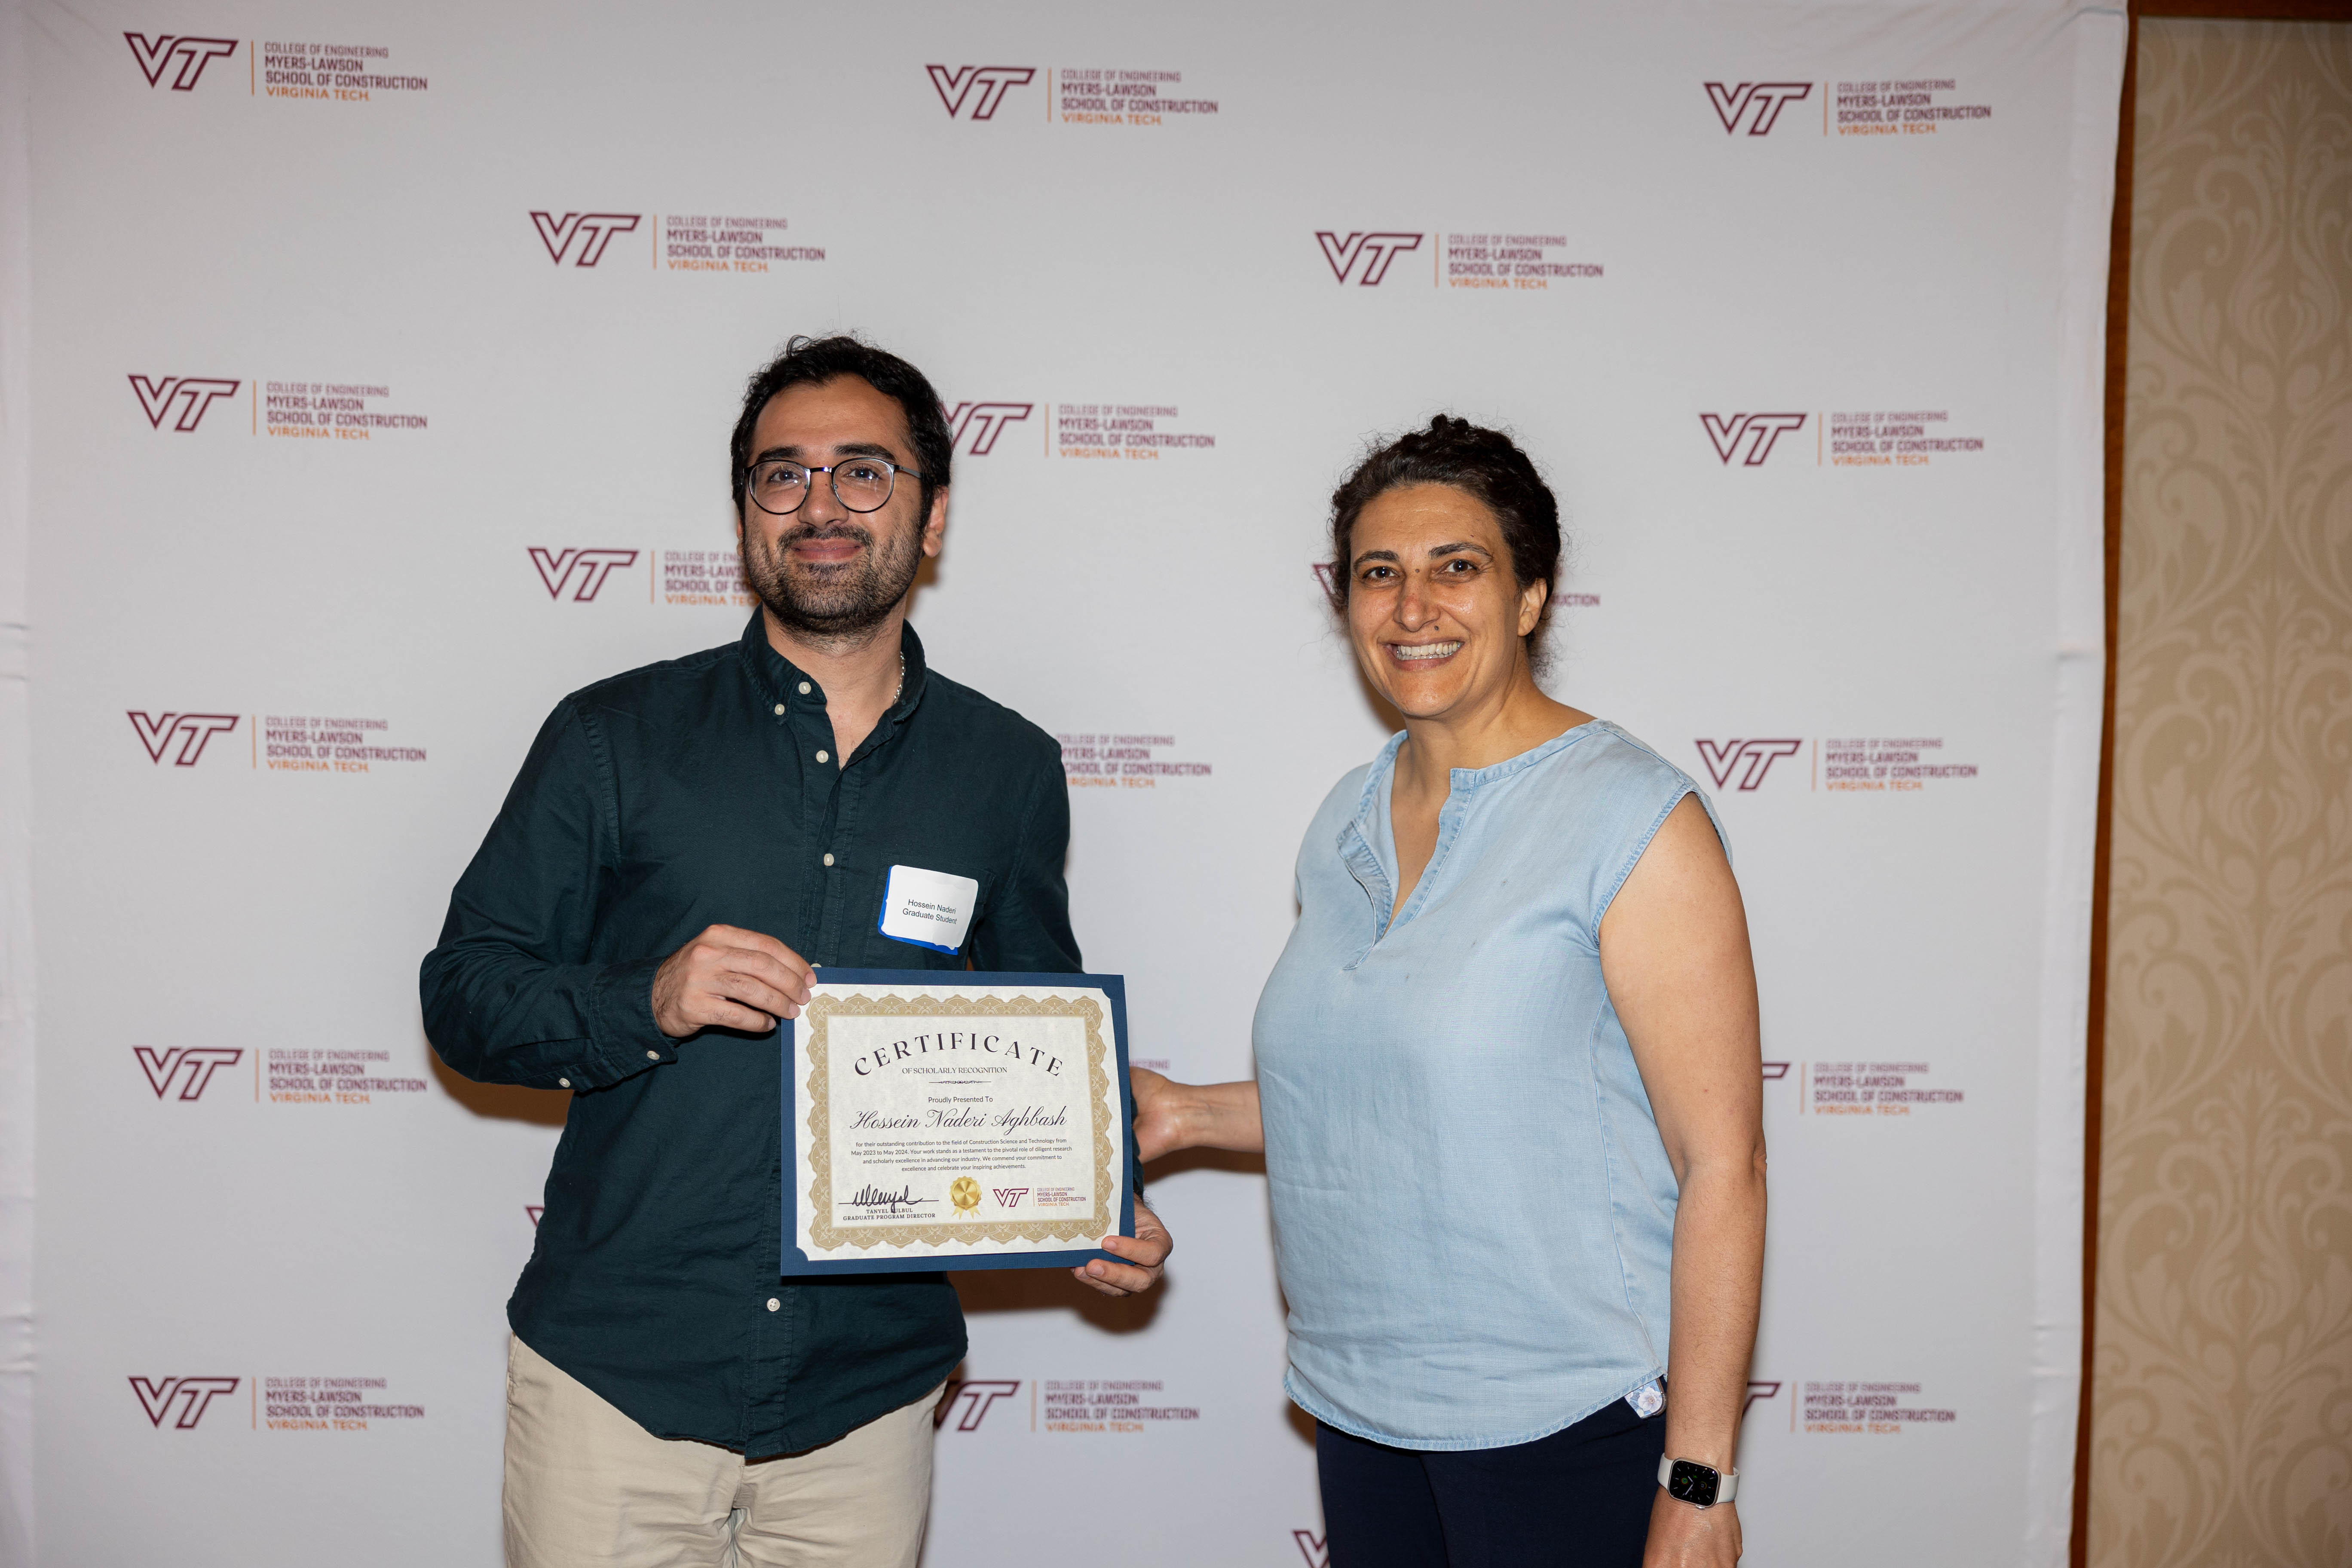 Hossein Naderi Aghbash (at left) and Tanyel Bulbul. Photo by Will Drew for Virginia Tech.